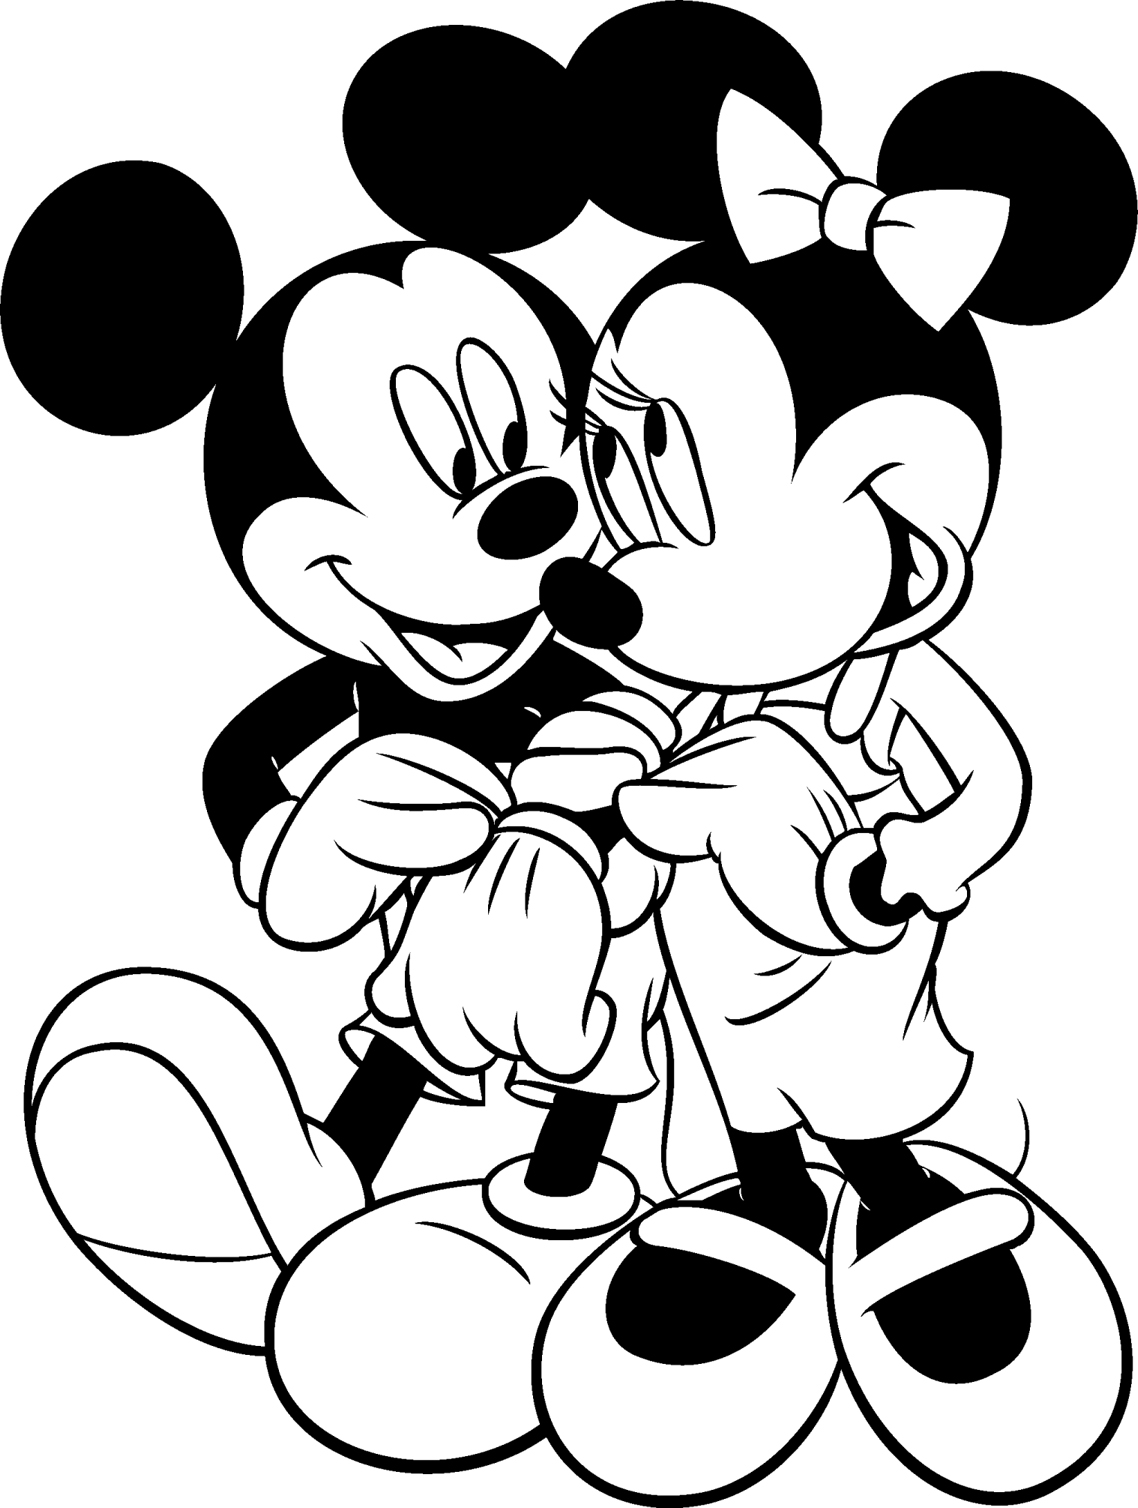 mickey mouse coloring page mickey mouse coloring pages 2 coloring pages to print mickey coloring mouse page 